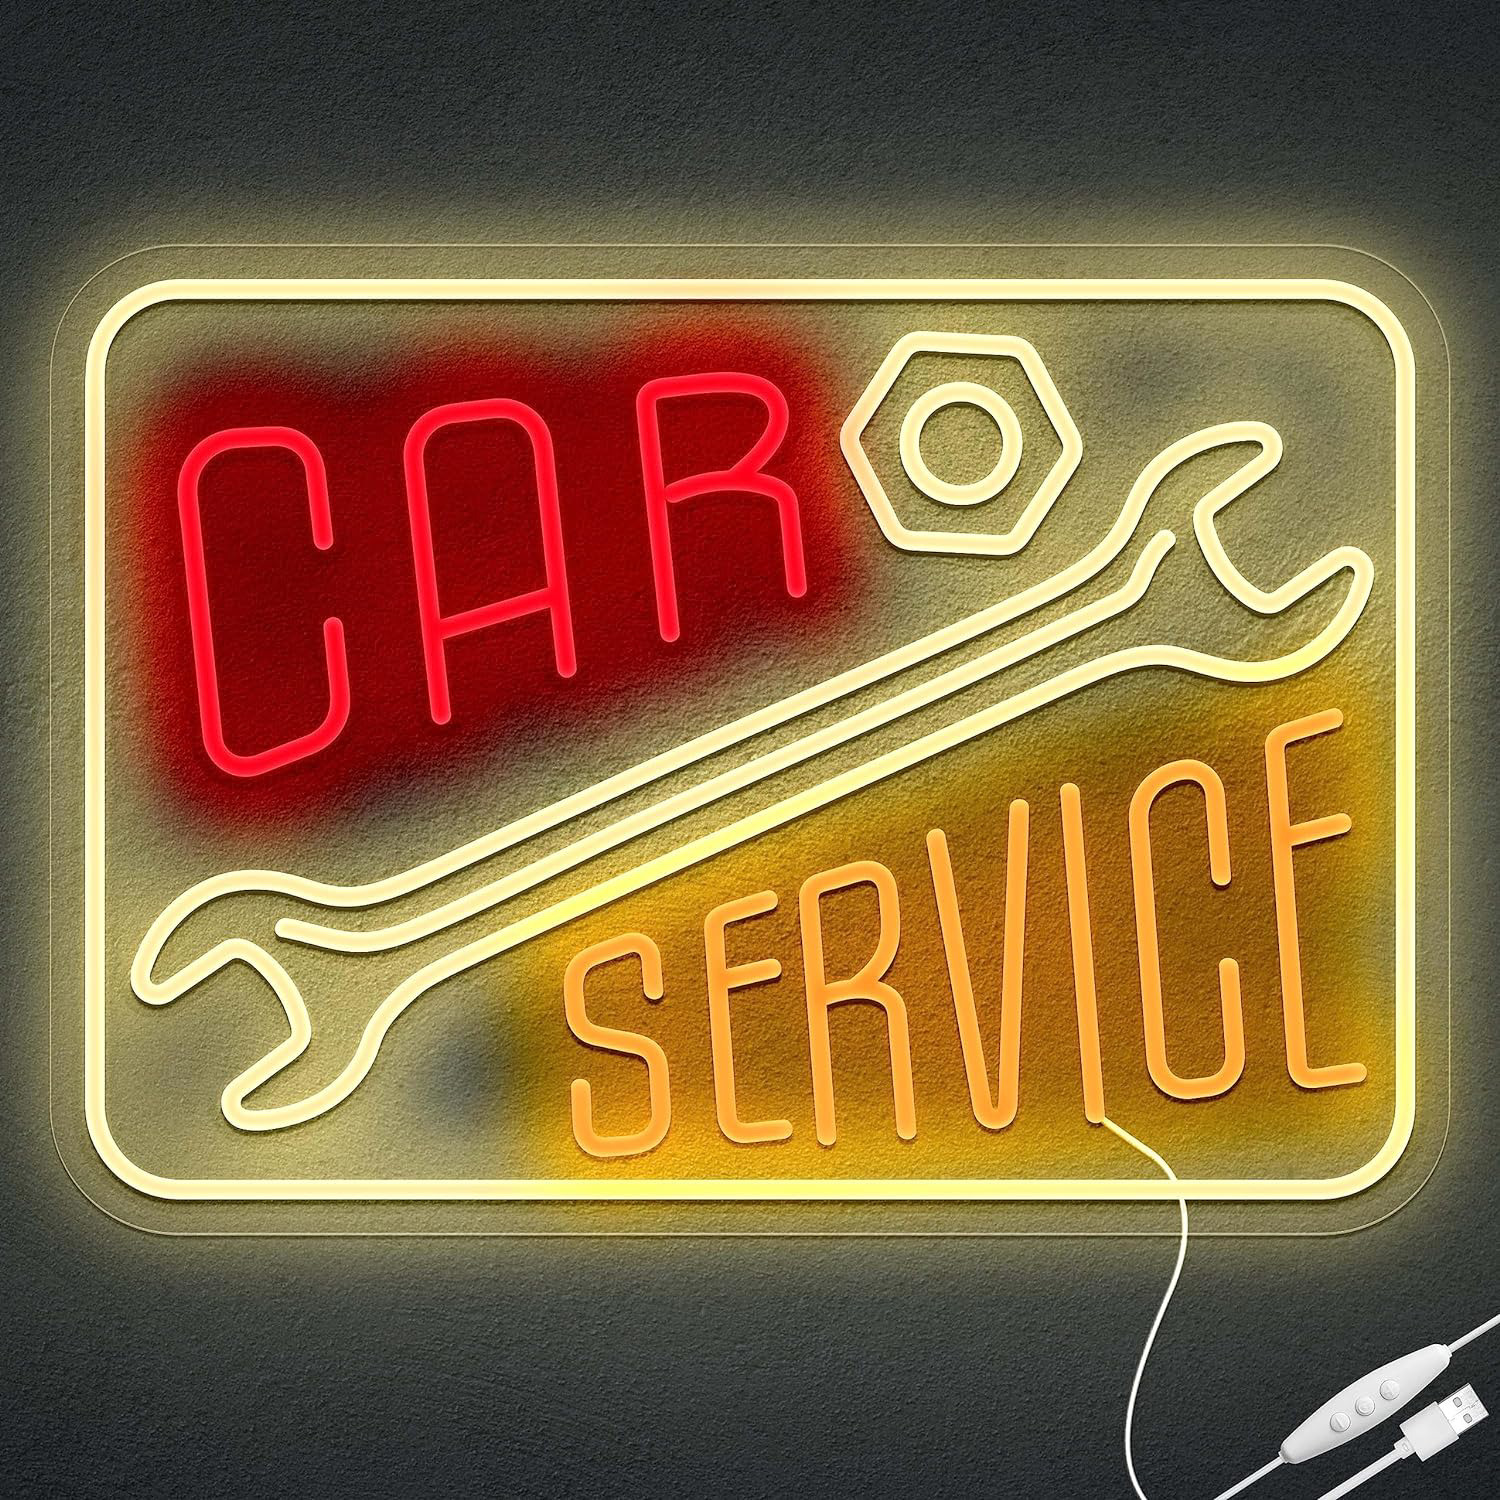 Car Service Neon Sign for Garage DecorDimmable USB LED Car Sign Neon Light